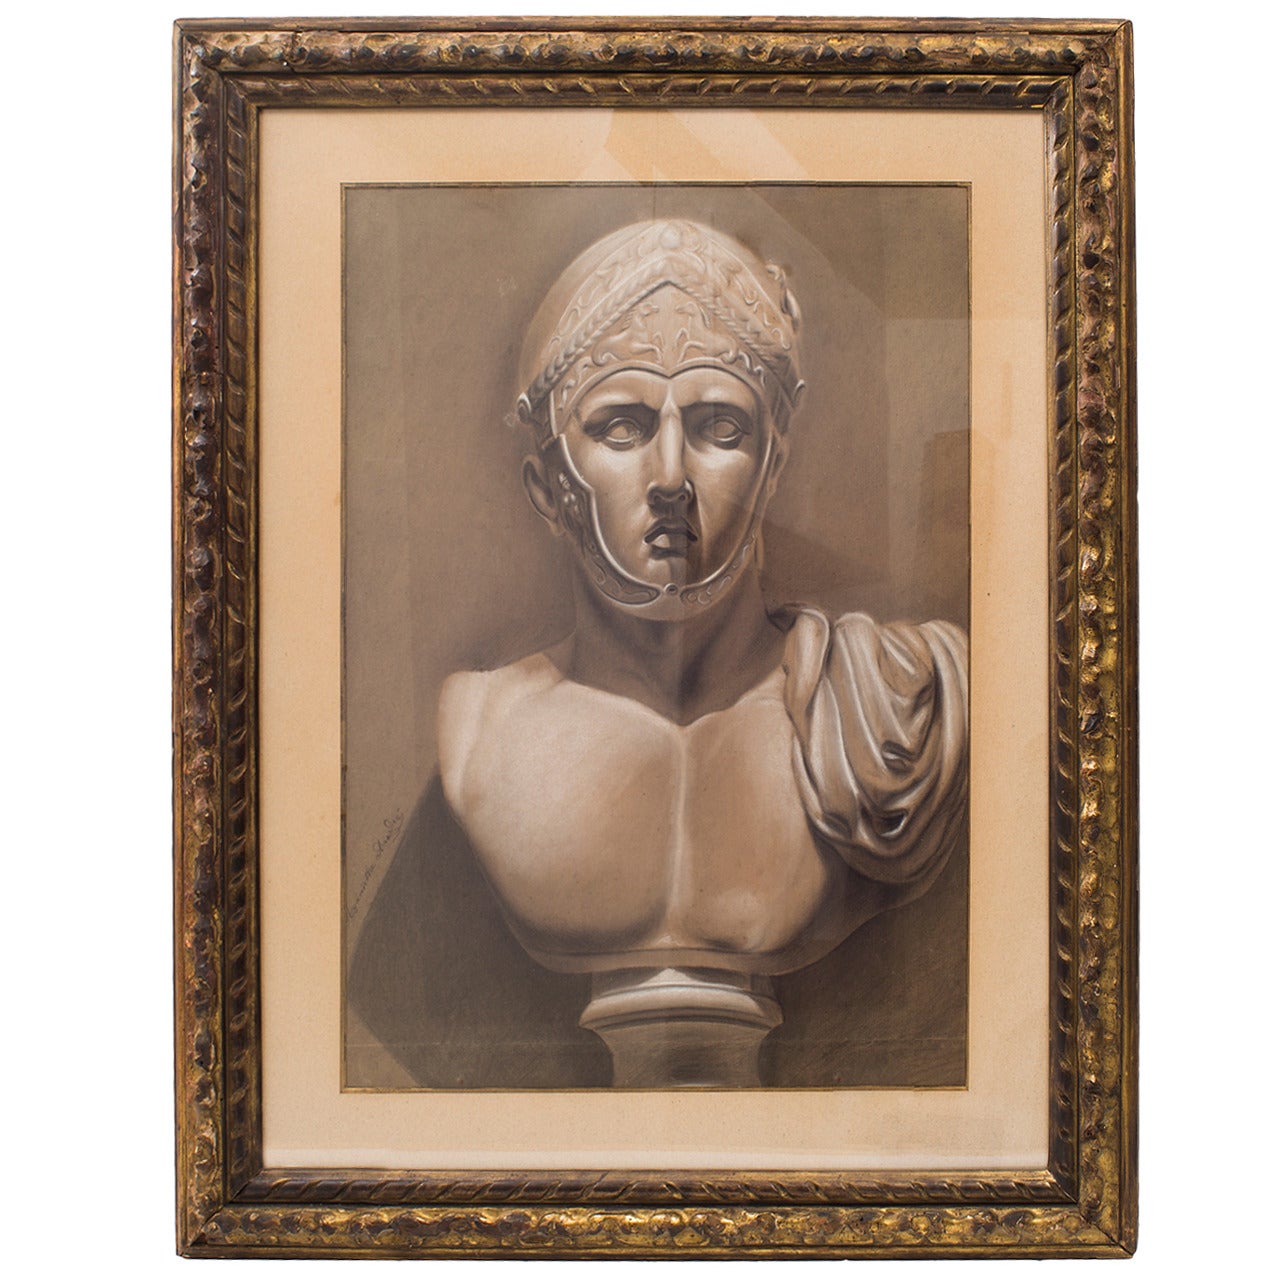 French “En Grisaille” Chalk and Charcoal Drawing of a Roman Soldier Bust